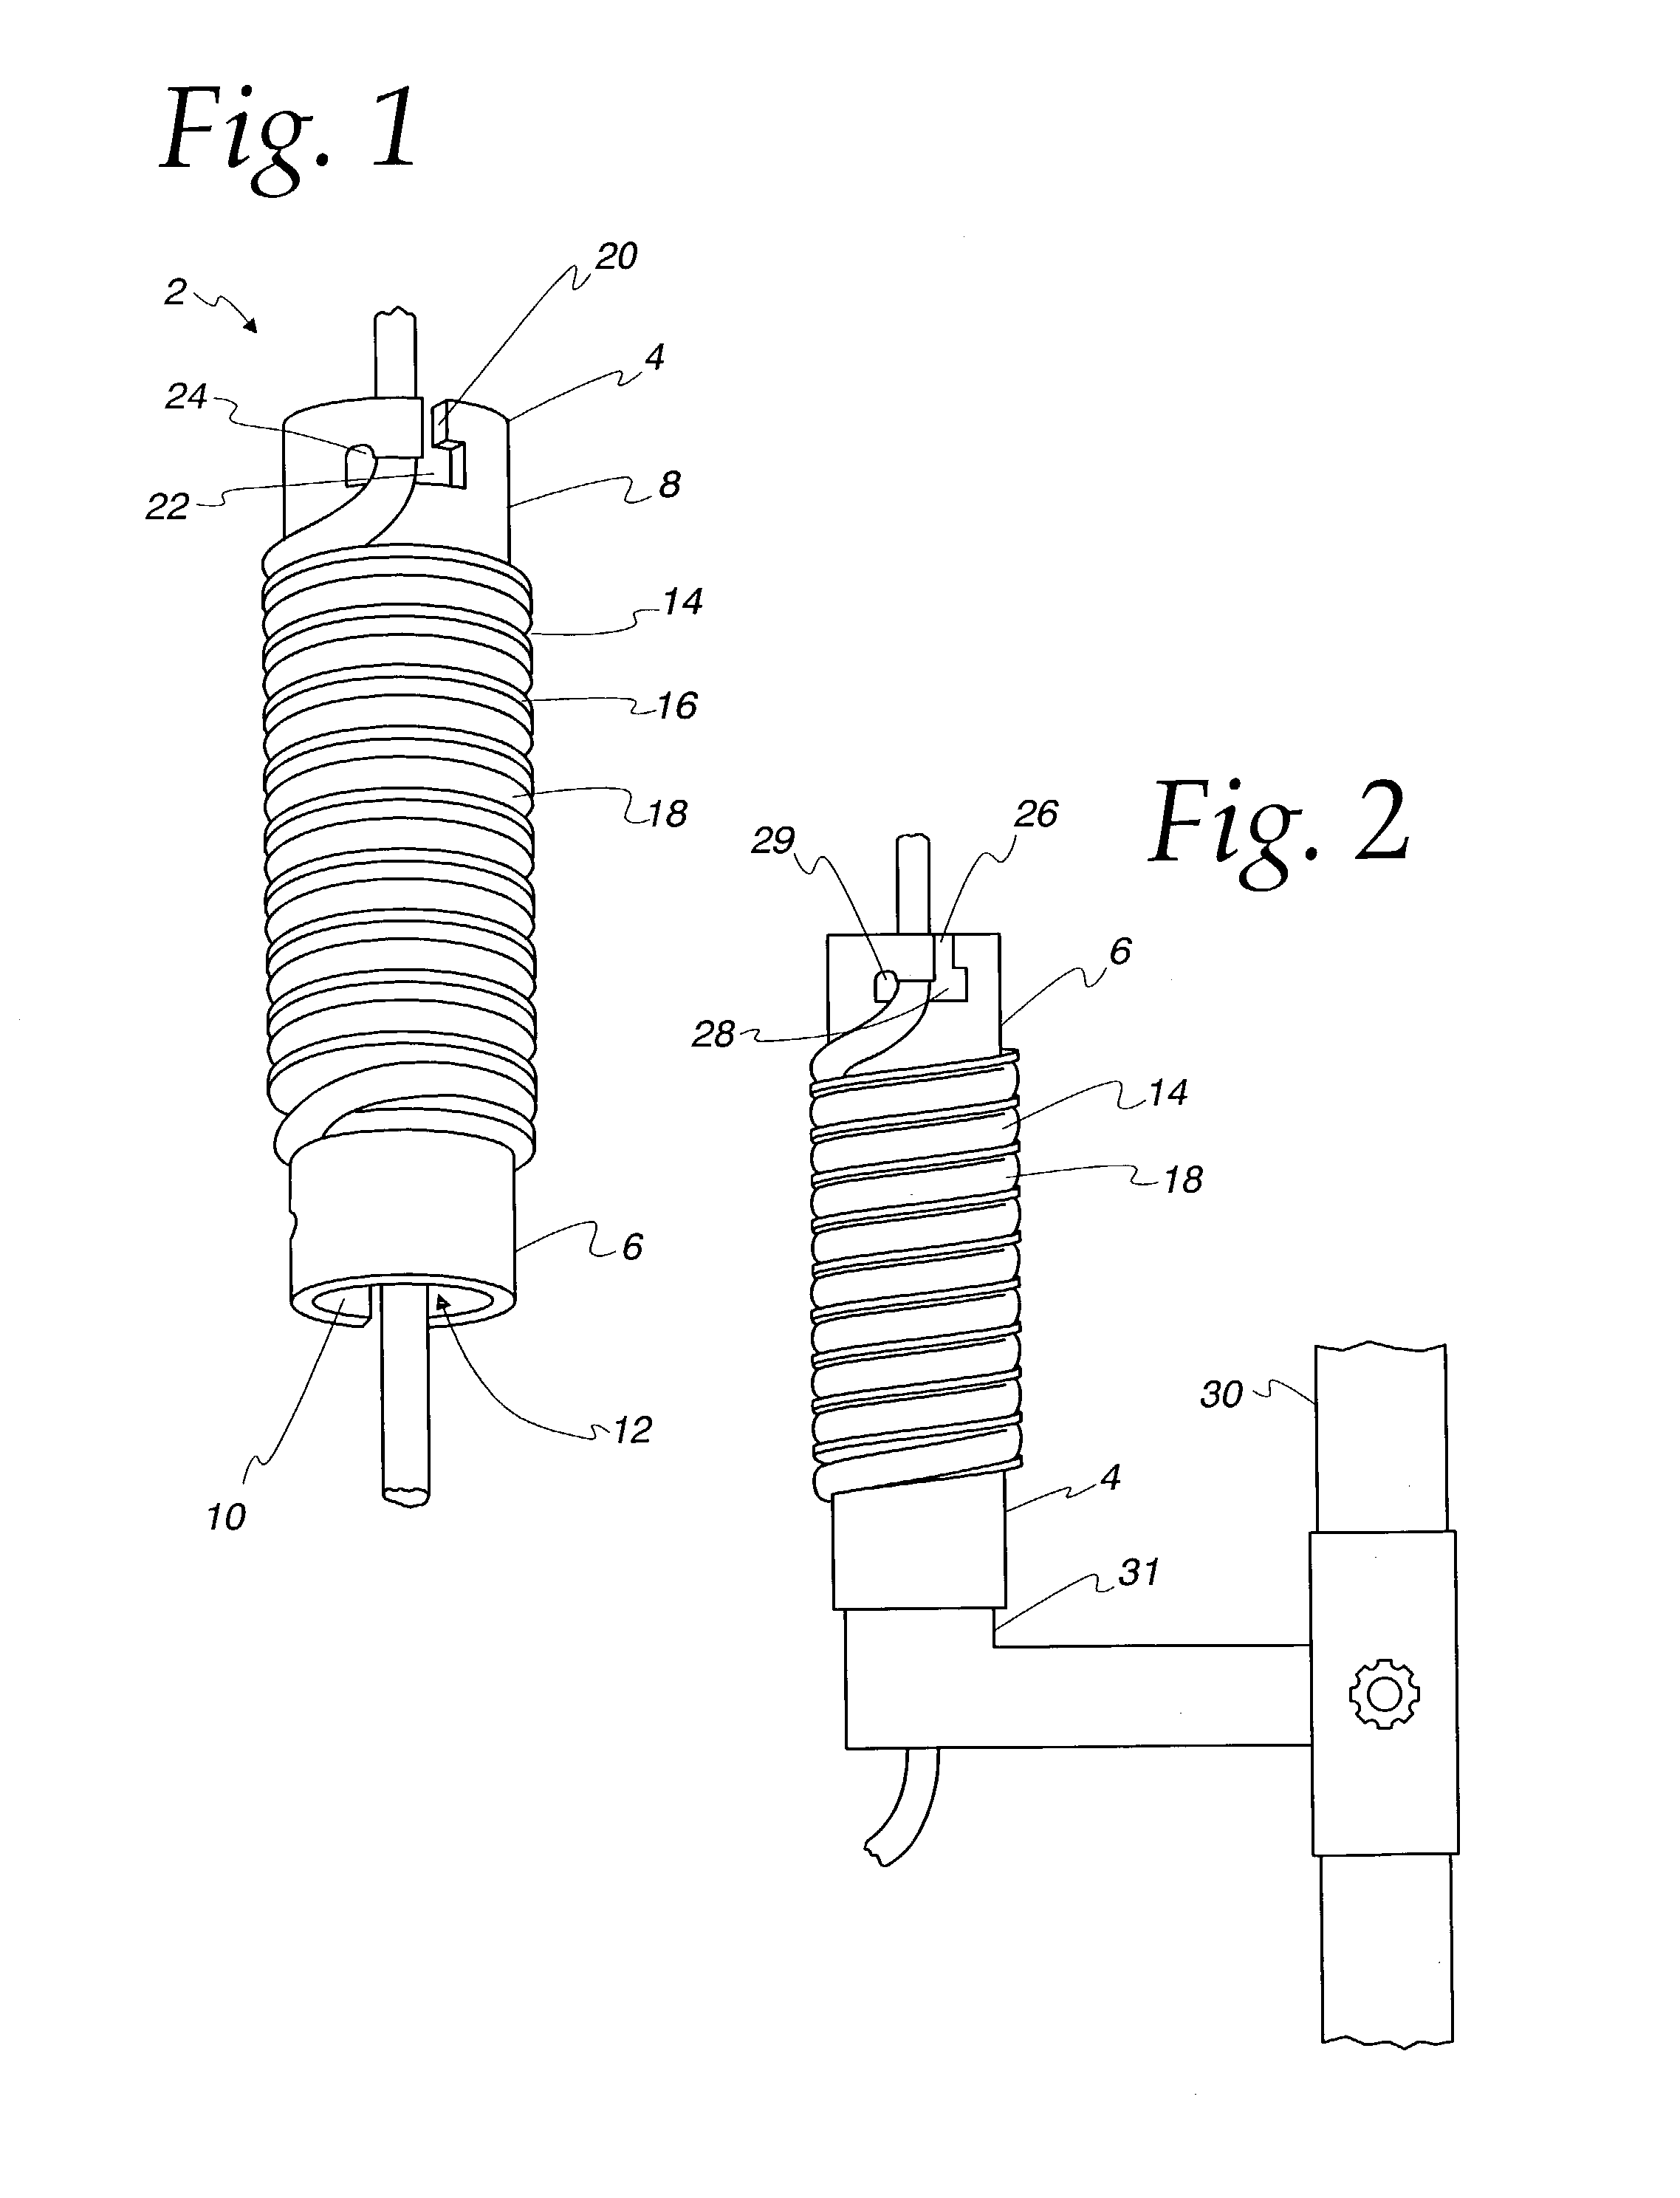 Liquid conductive cooling/heating device and method of use